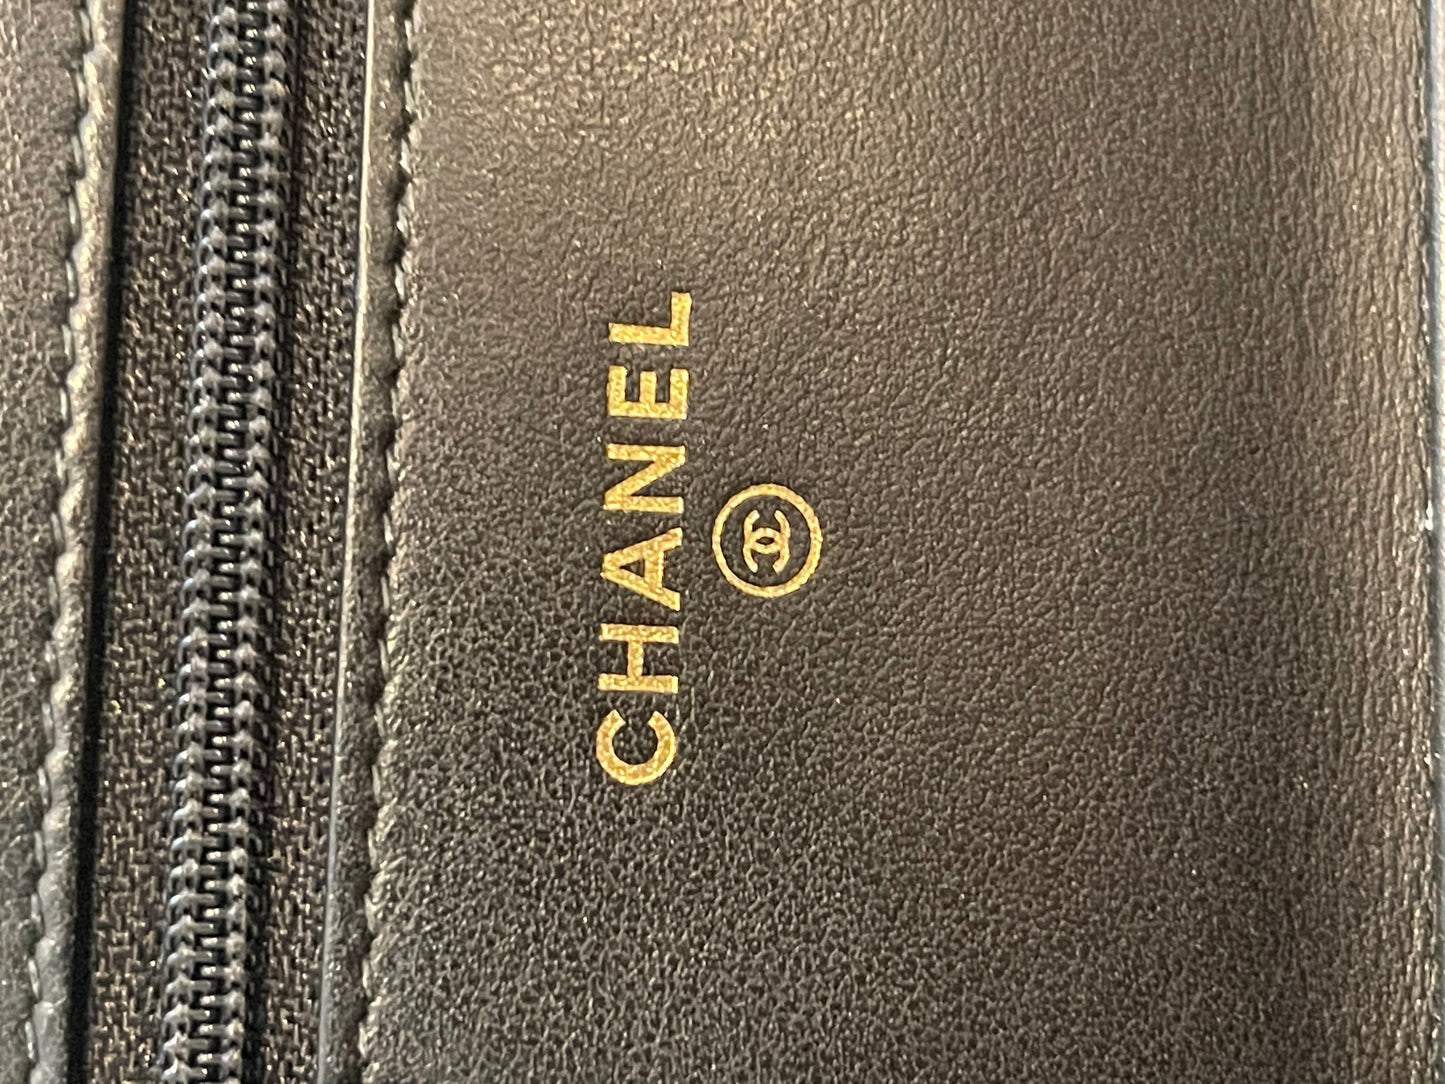 Chanel Wallet on Chain Quilted Cc Filigree Woc Black Caviar Leather Cross Body Bag